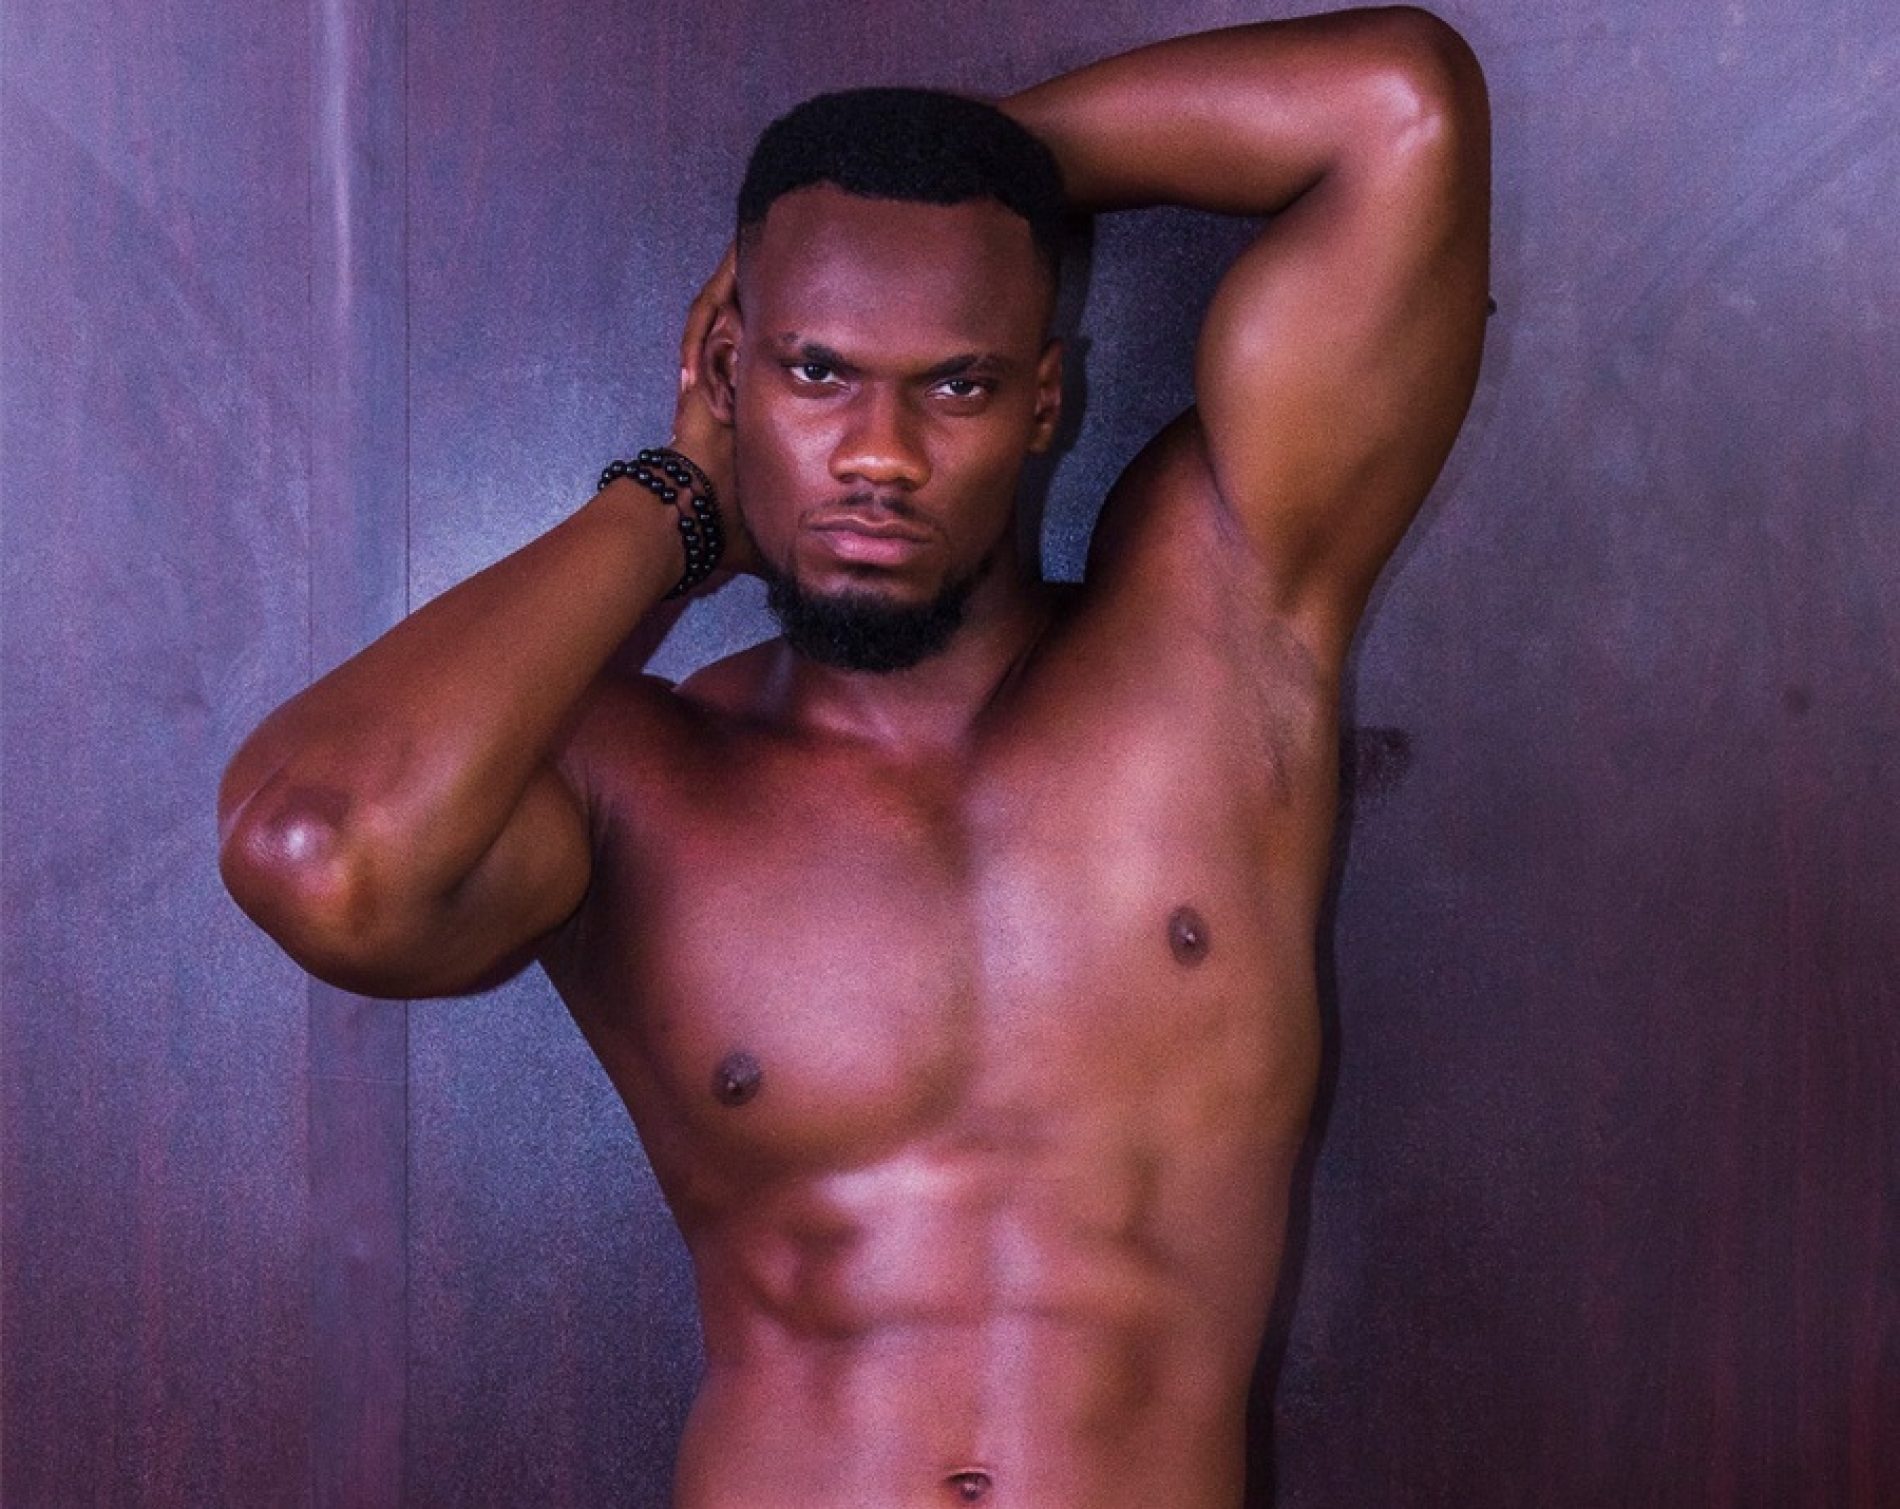 There’s a Mr. Nigeria 2018 and he is a very sexy Nelson Enwerem